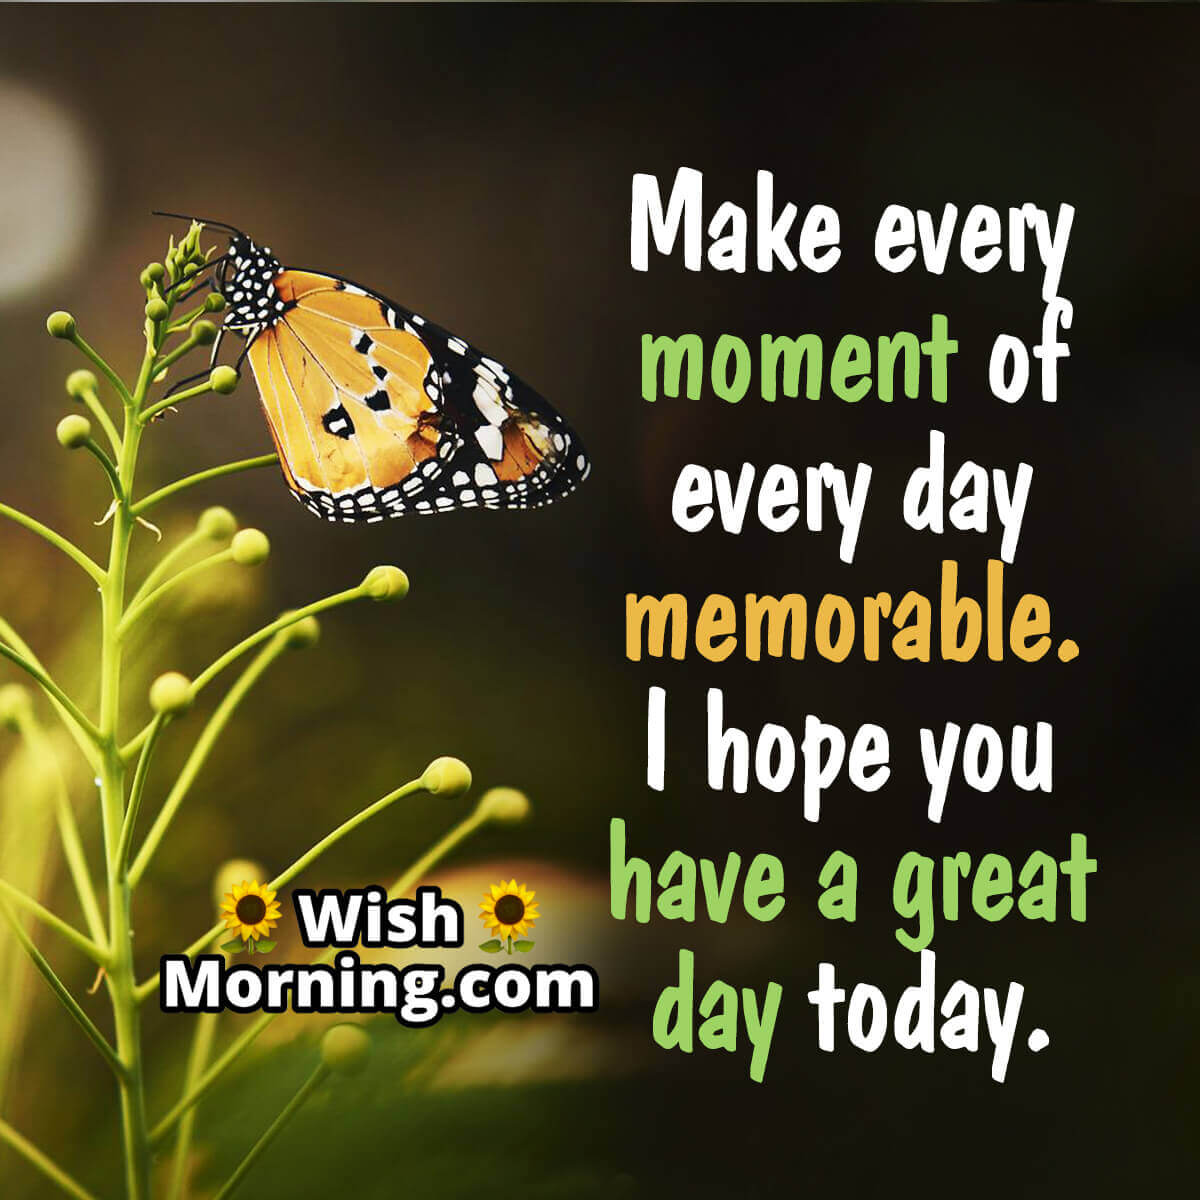 Great Day Wishes - Wish Morning